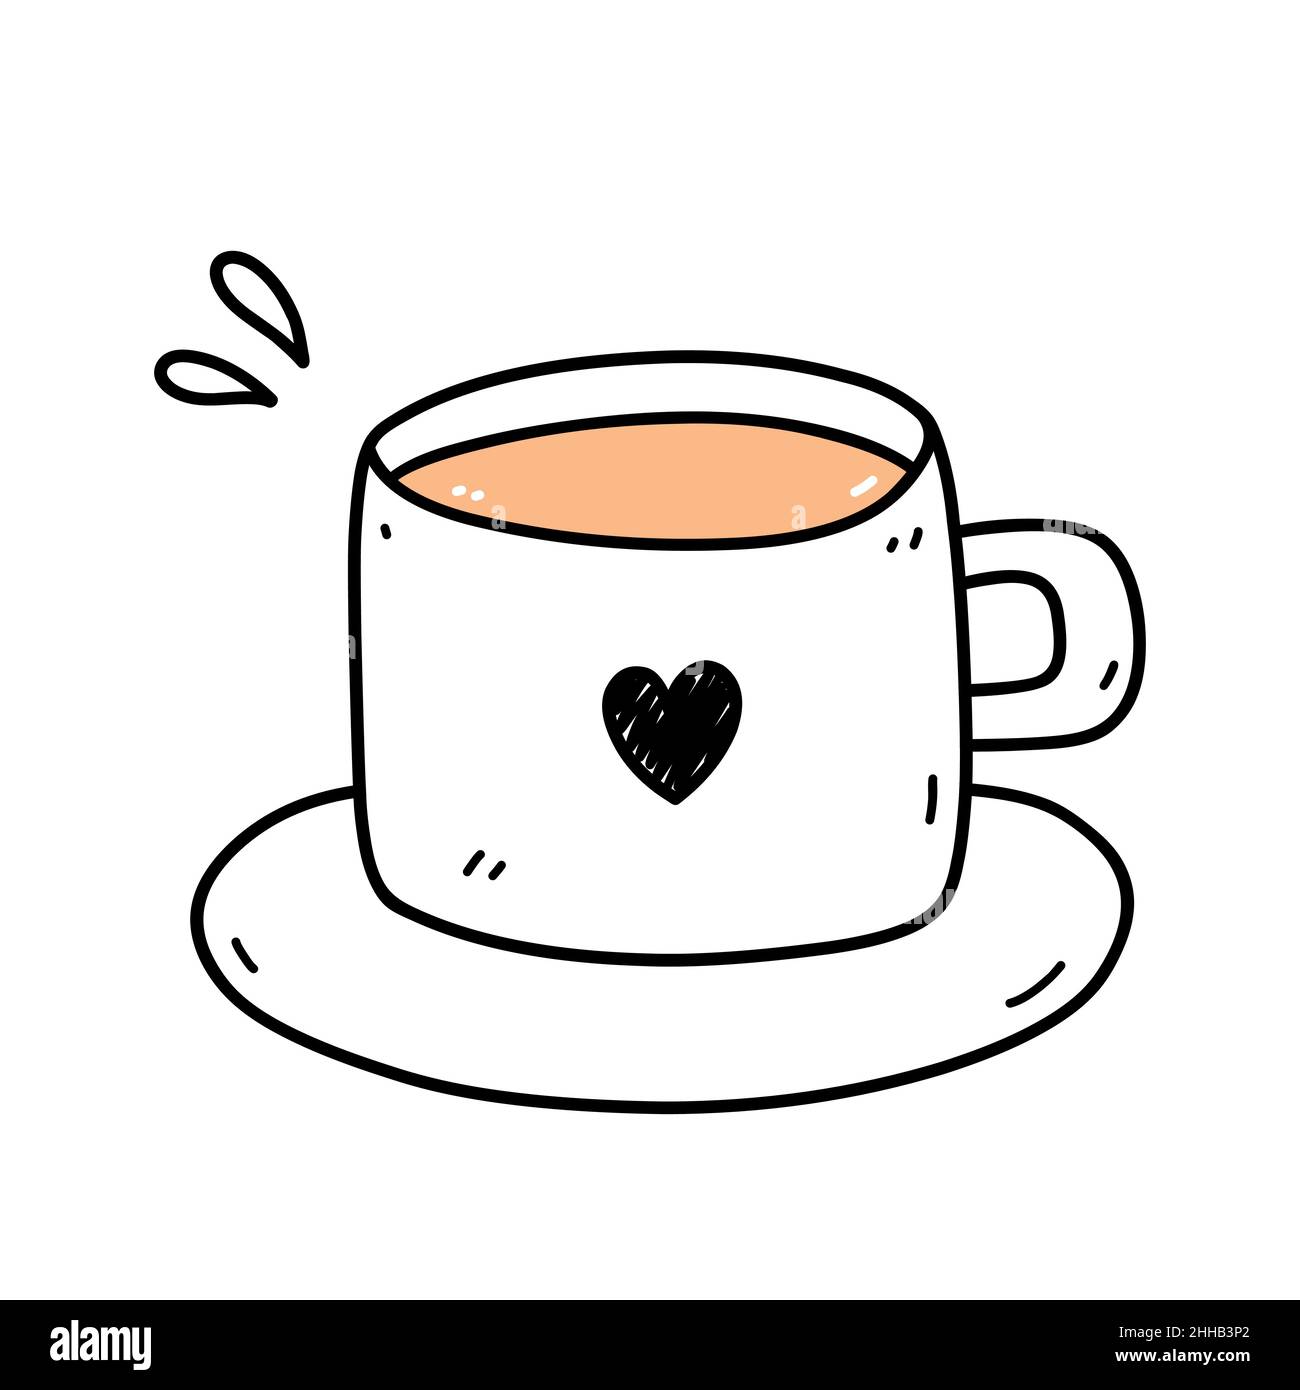 https://c8.alamy.com/comp/2HHB3P2/cute-cup-of-coffee-on-a-saucer-isolated-on-white-background-vector-hand-drawn-illustration-in-doodle-style-perfect-for-cards-menu-logo-decoration-2HHB3P2.jpg